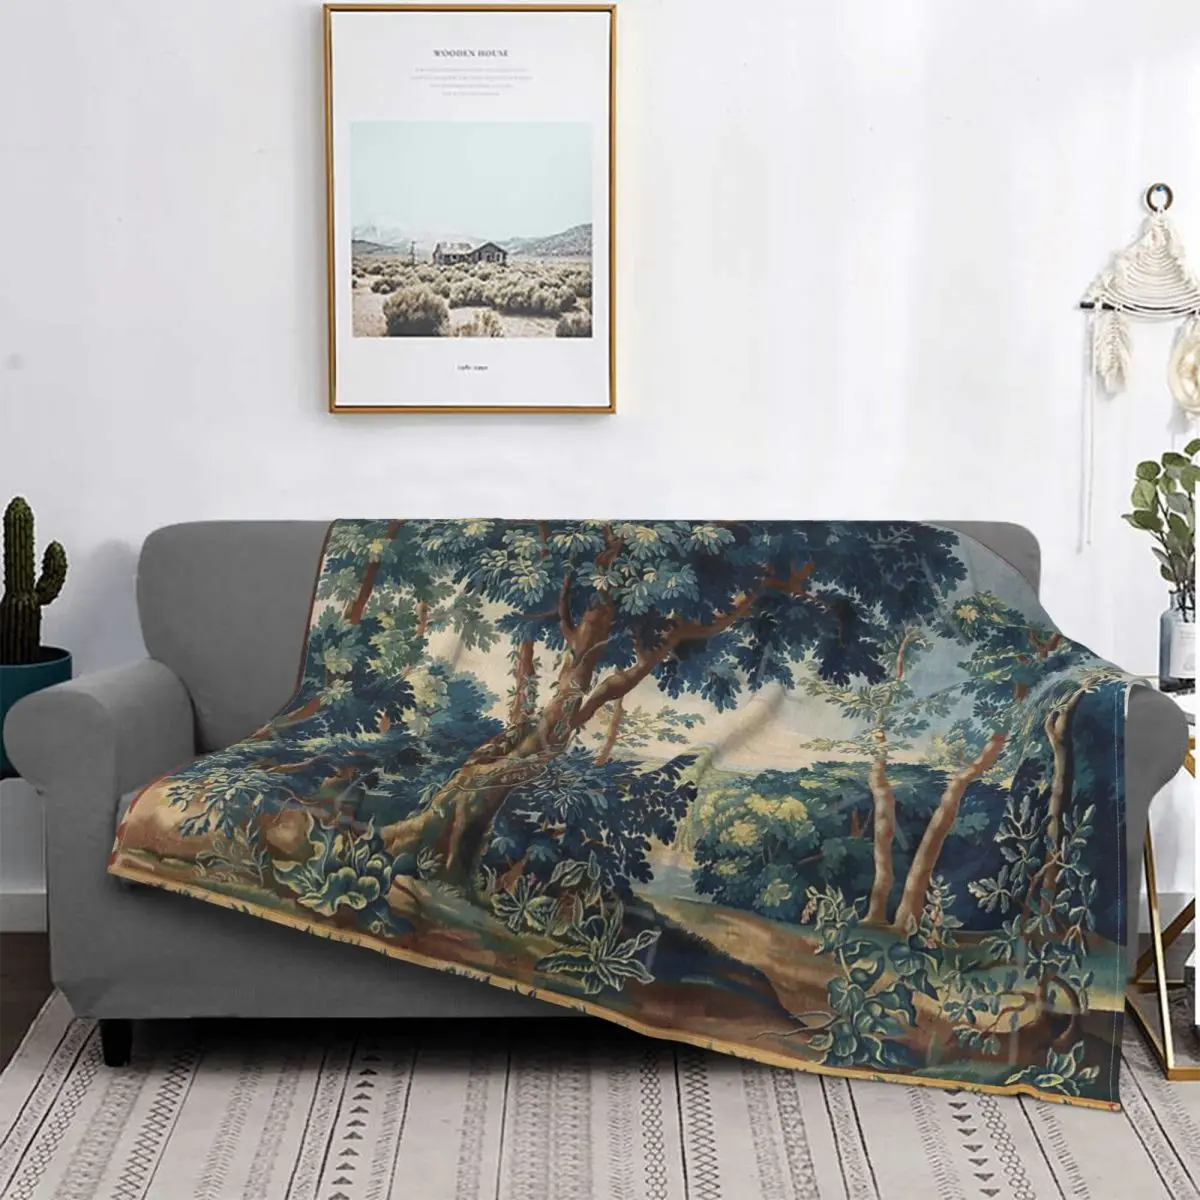 

Greenery Trees In Woodland Landscape Antique Flemish Tapestry Throw Blanket Drop Fabrics Bed Covers Winter Pizza